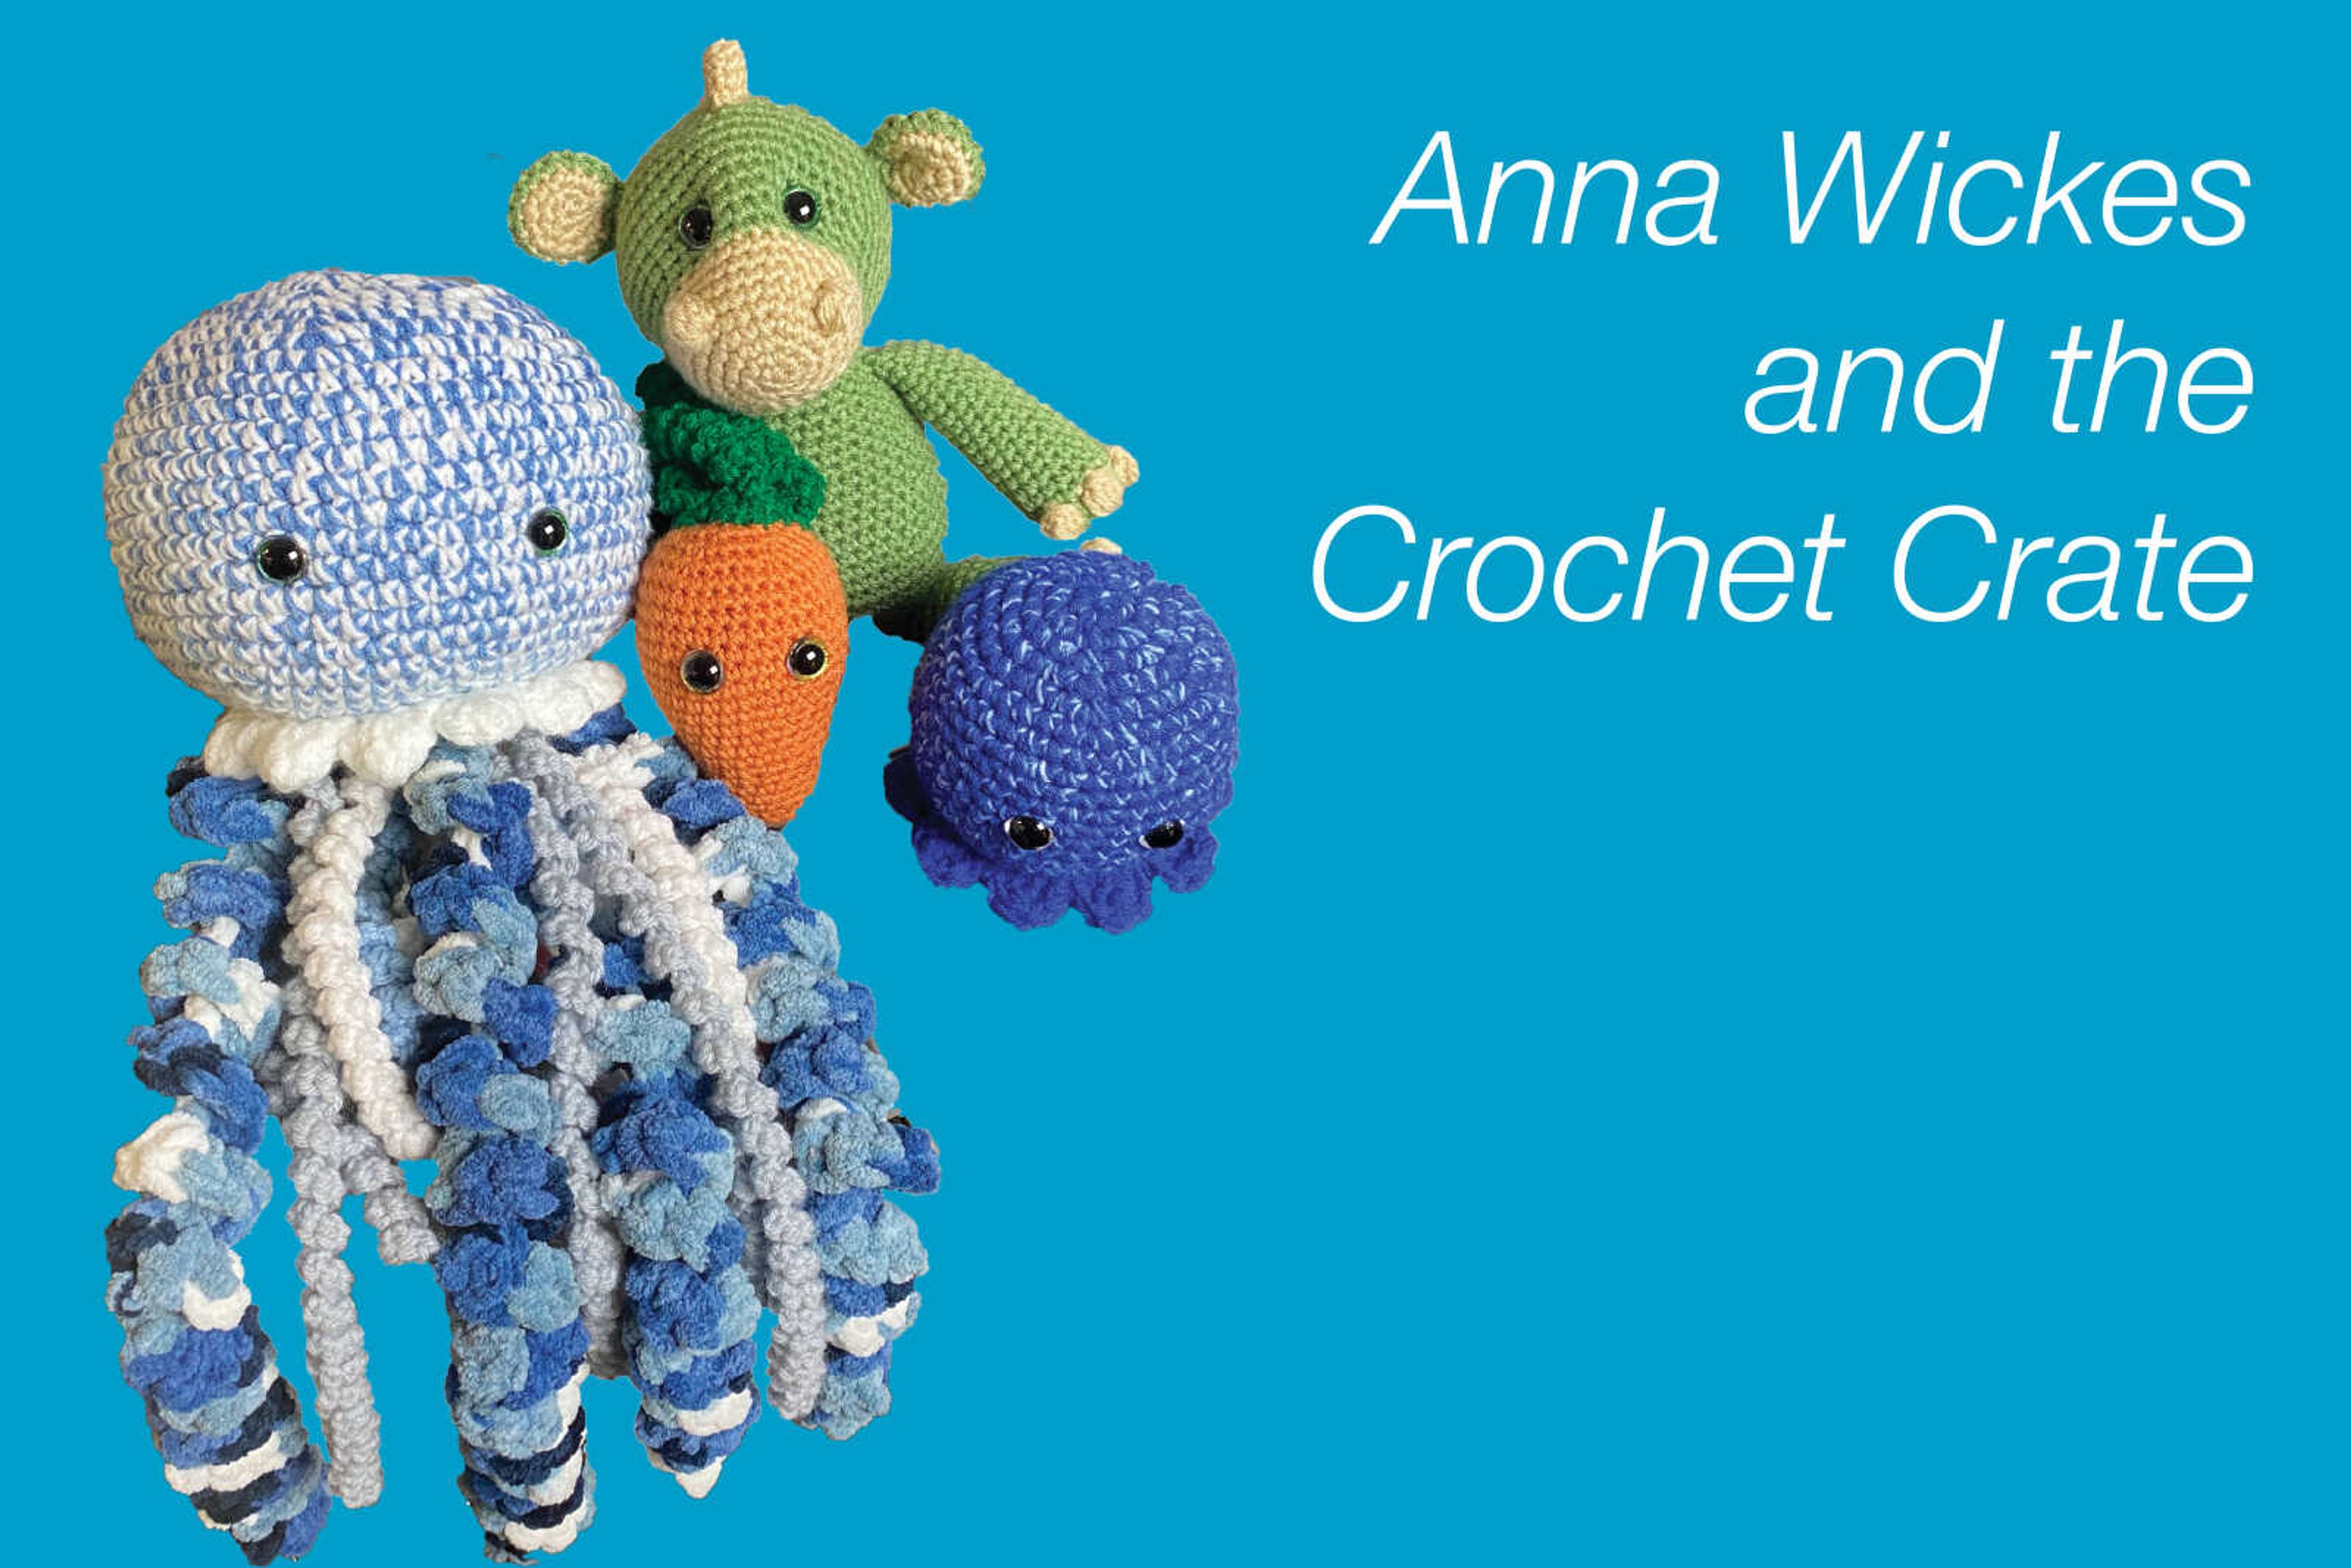 Crocheting: How a hobby became a business